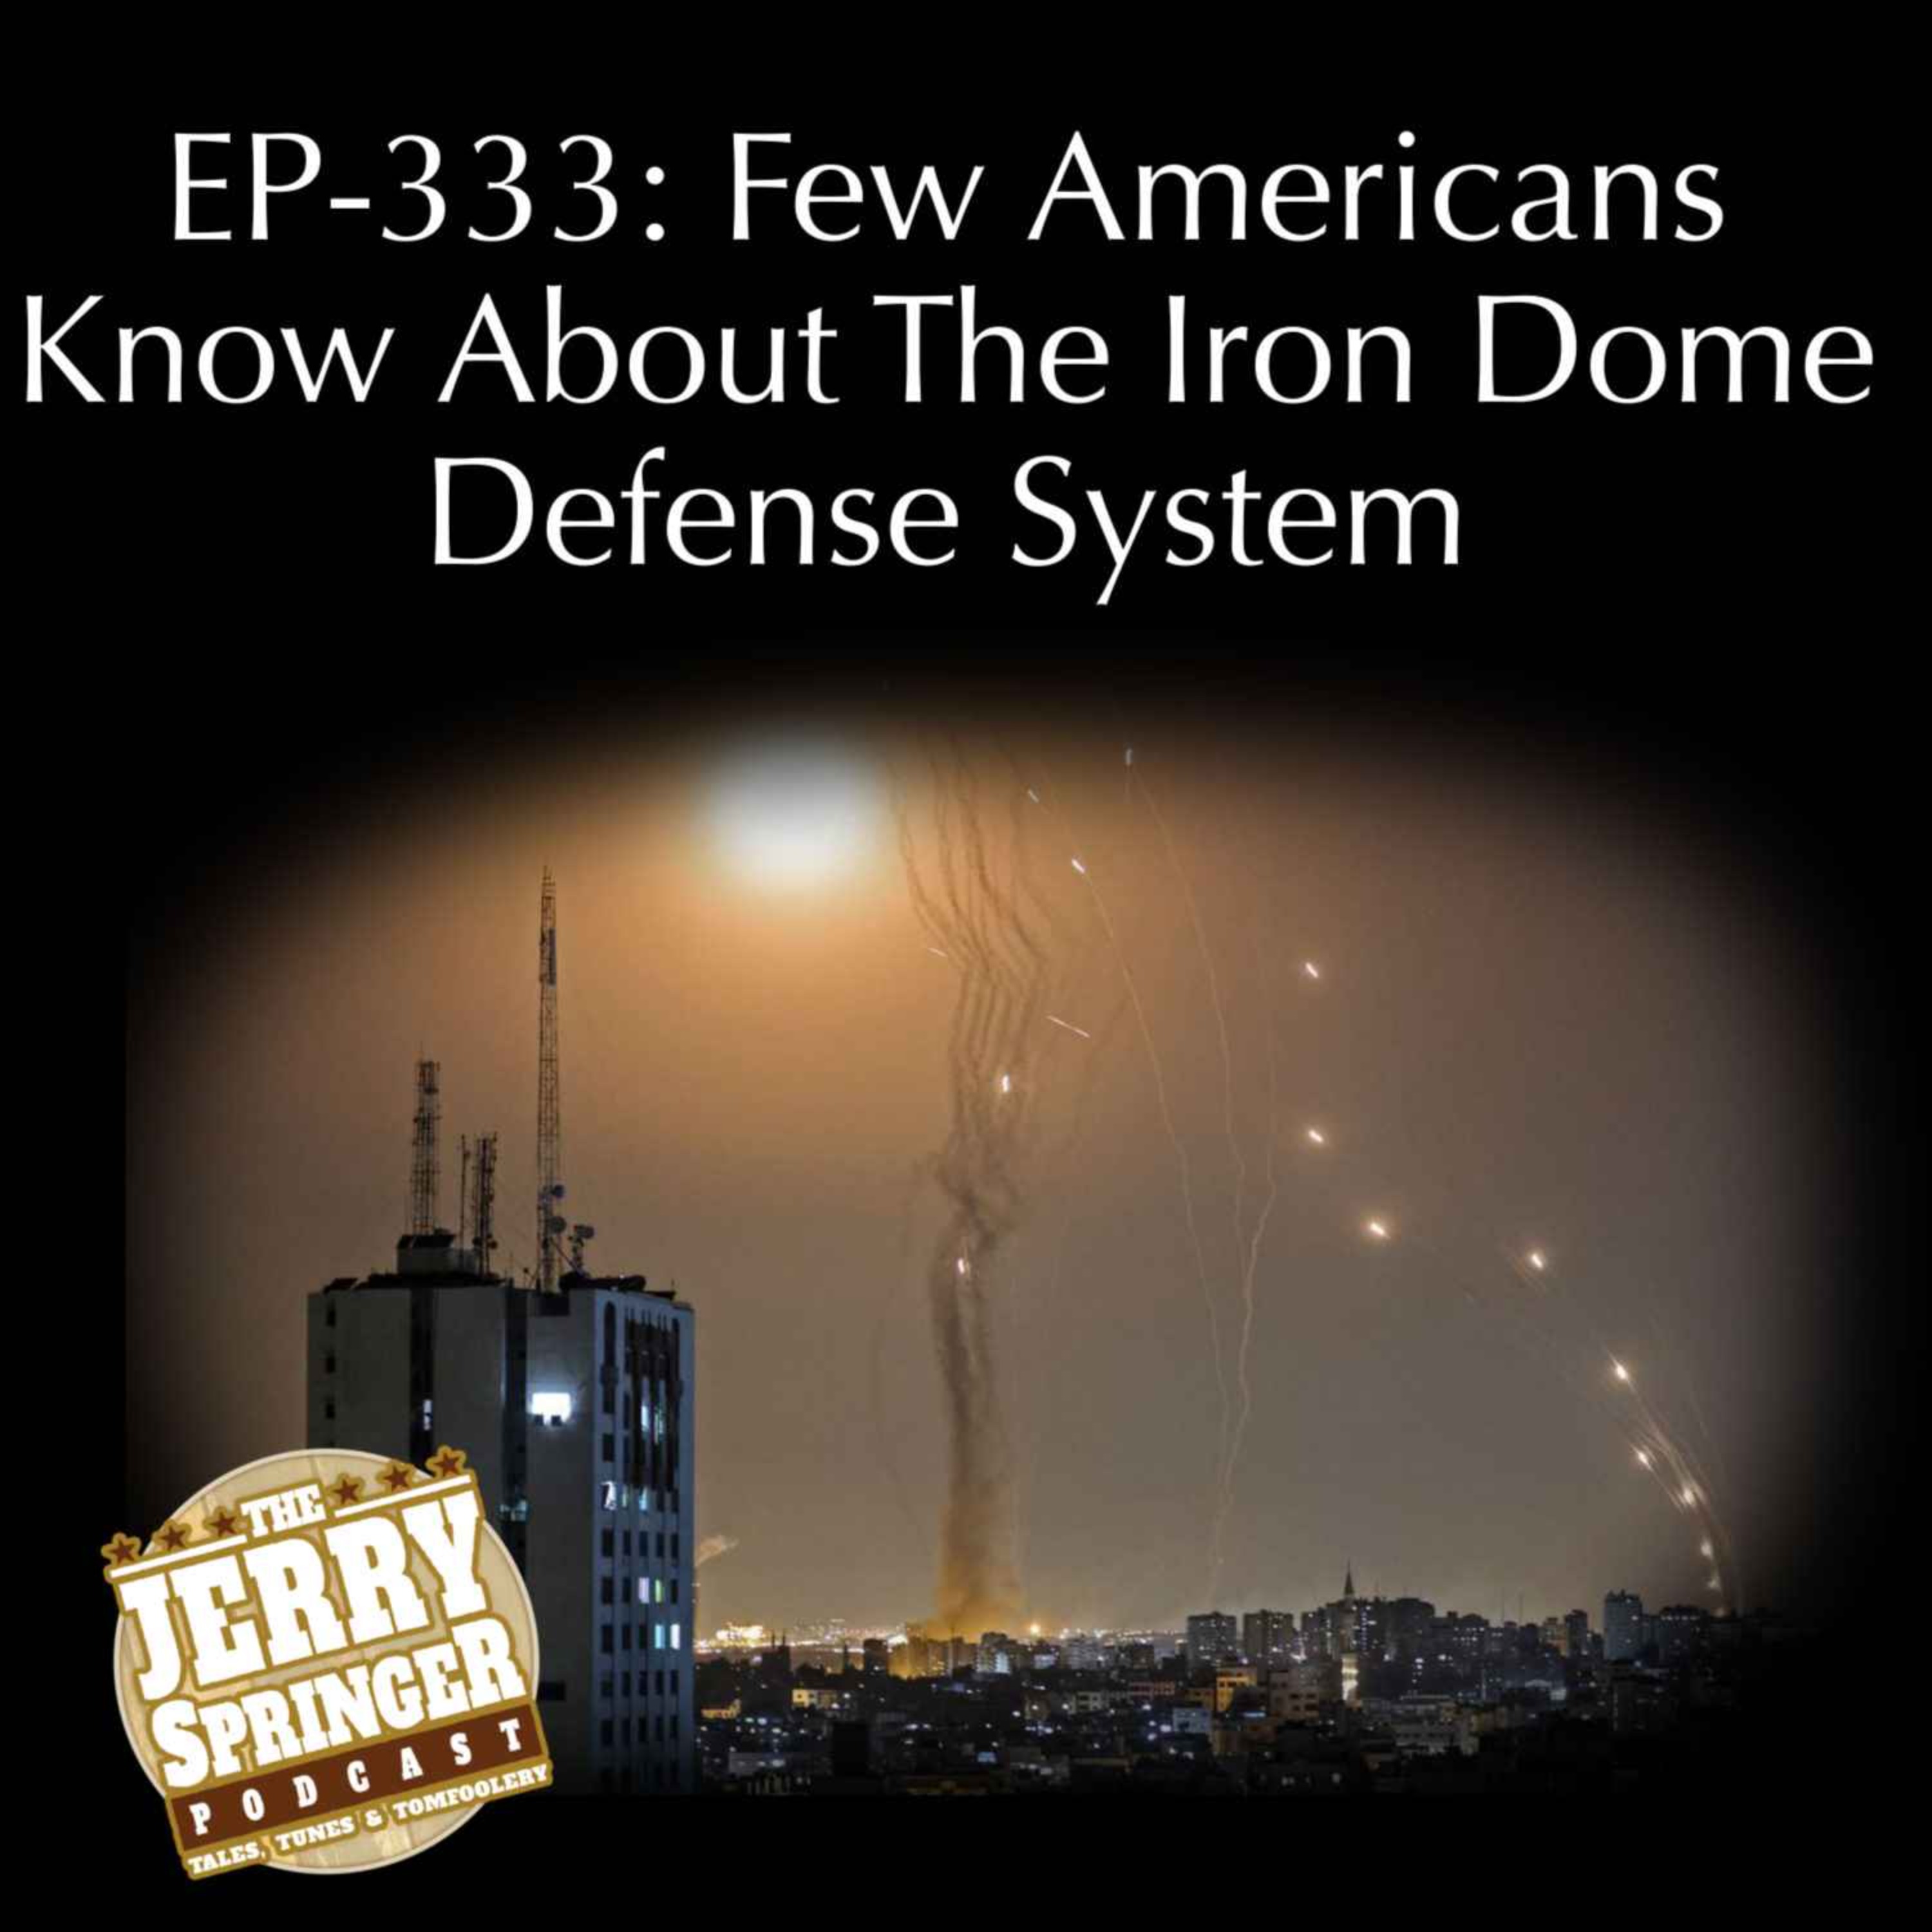 Few Americans Know About The Iron Dome Defense System: EP-333